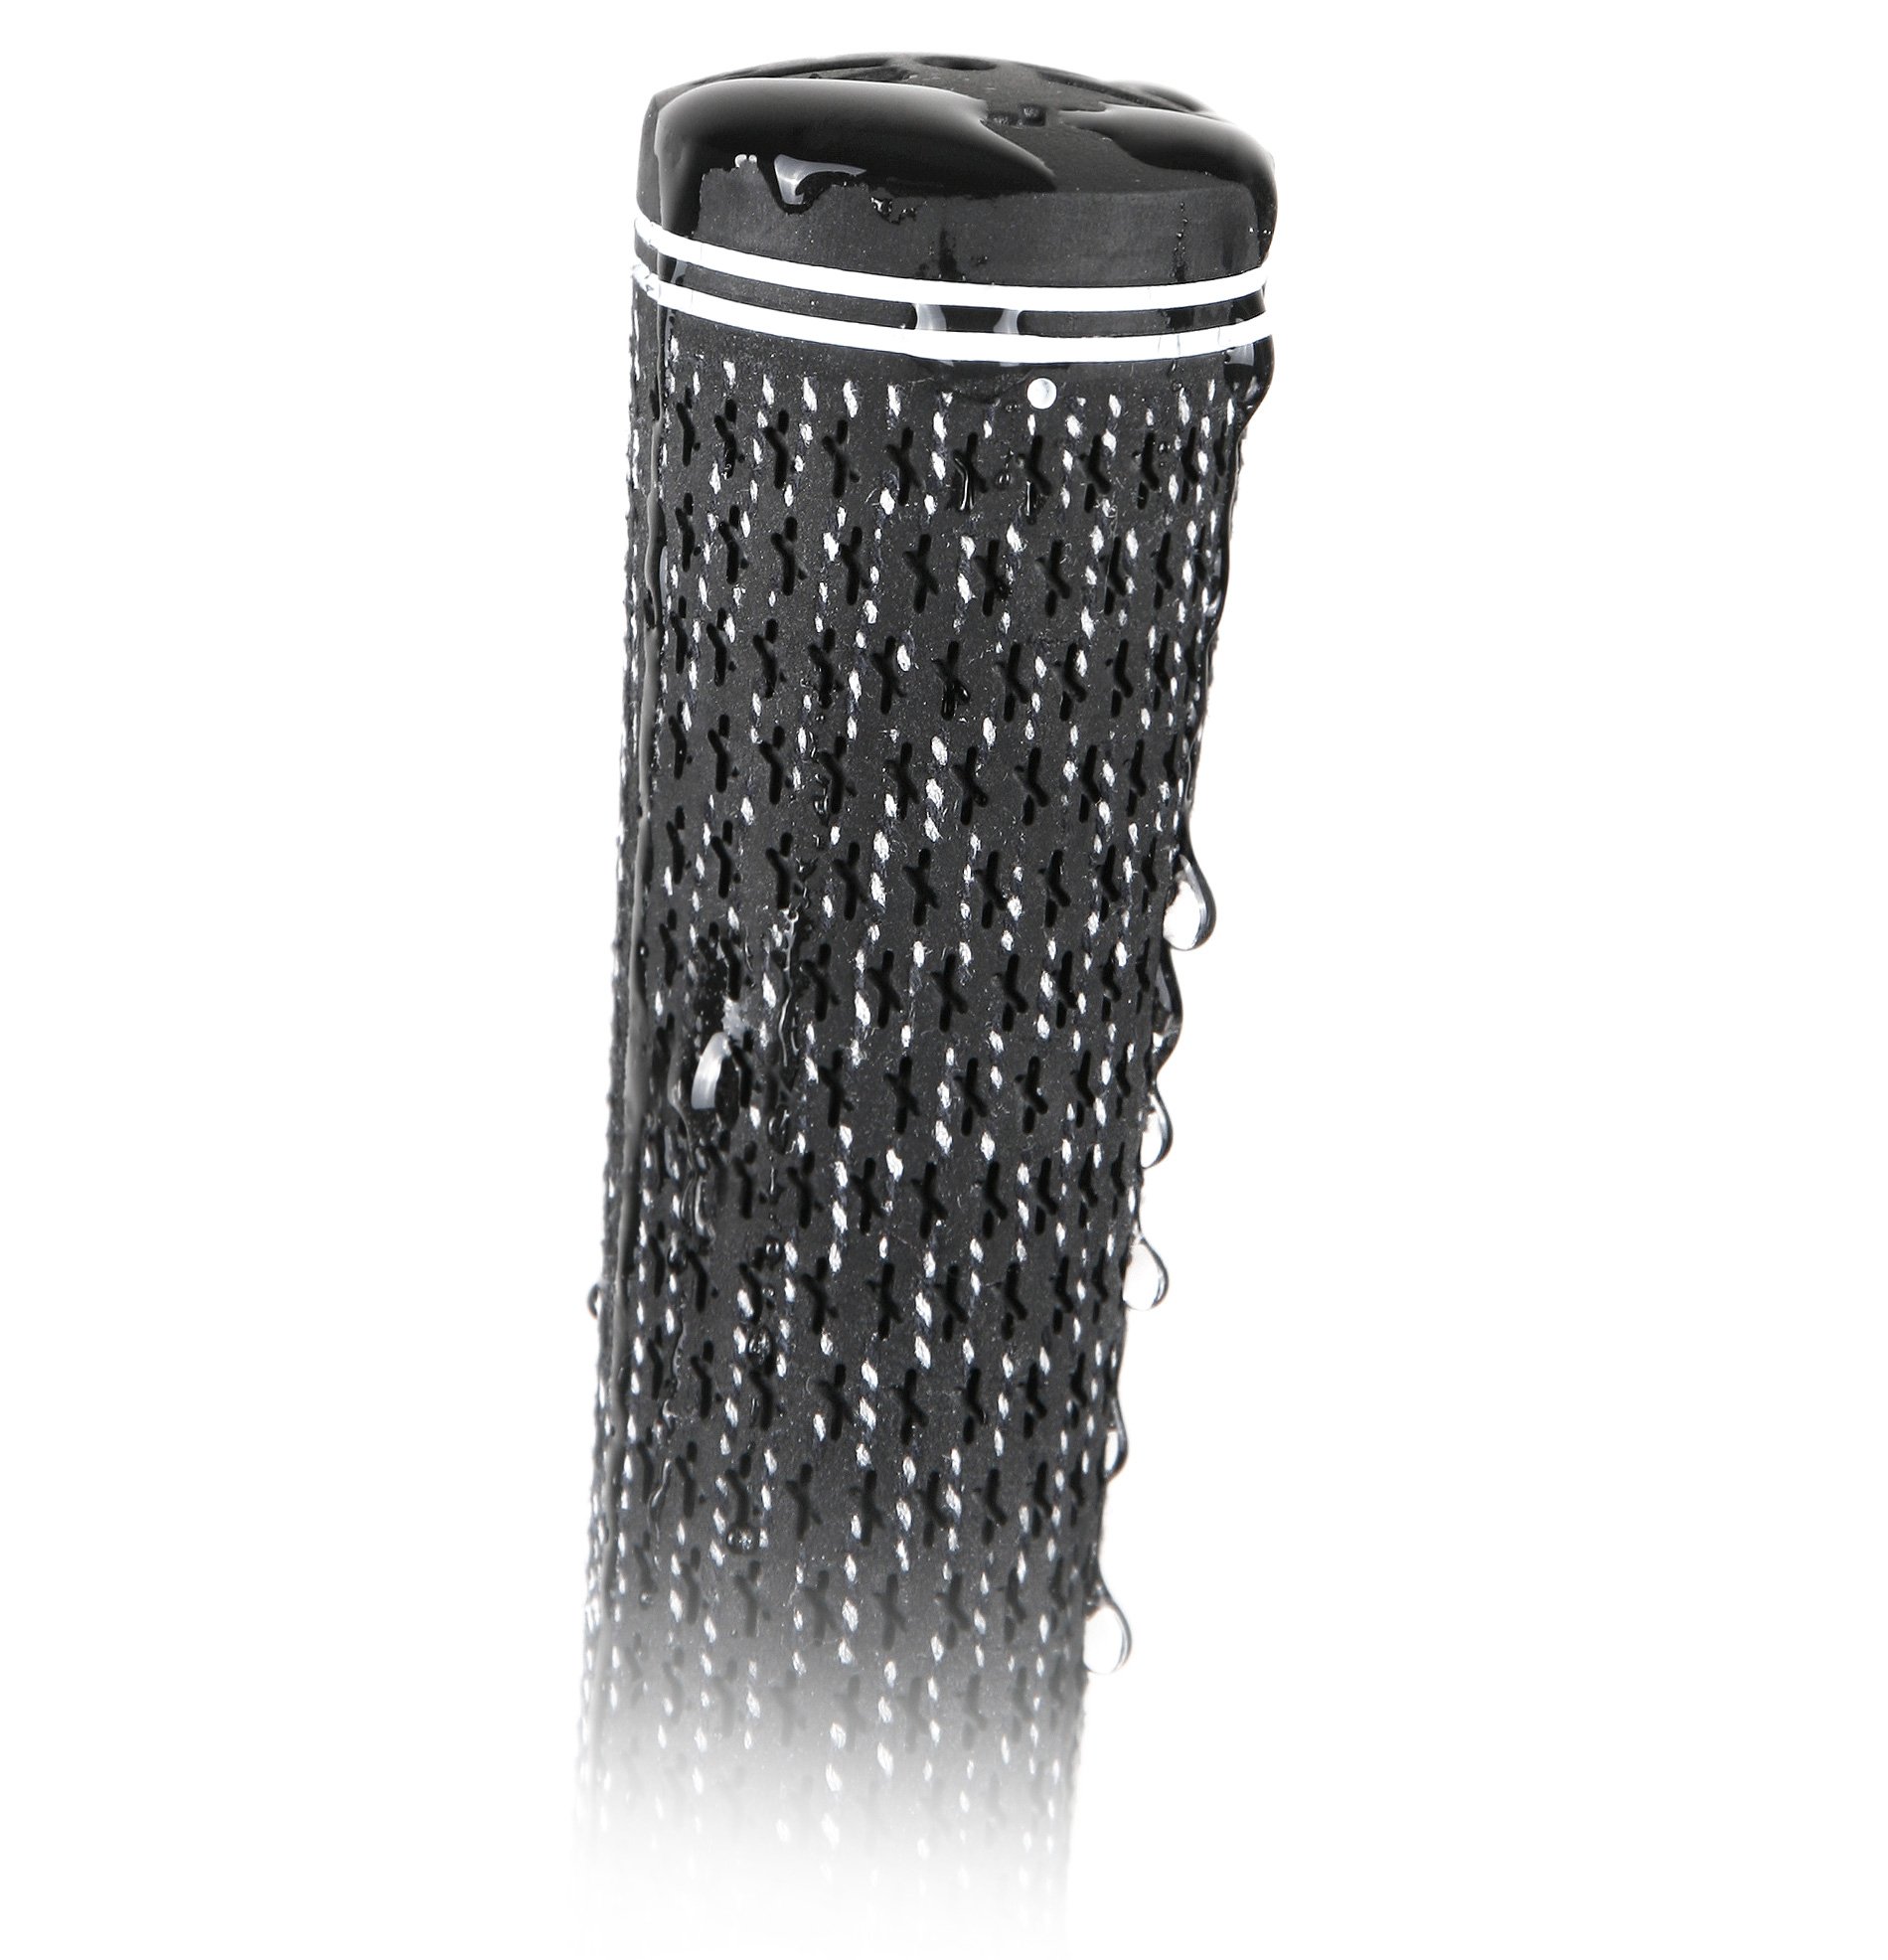 water beading off of the outer surface of the Karma Full Cord golf grip.